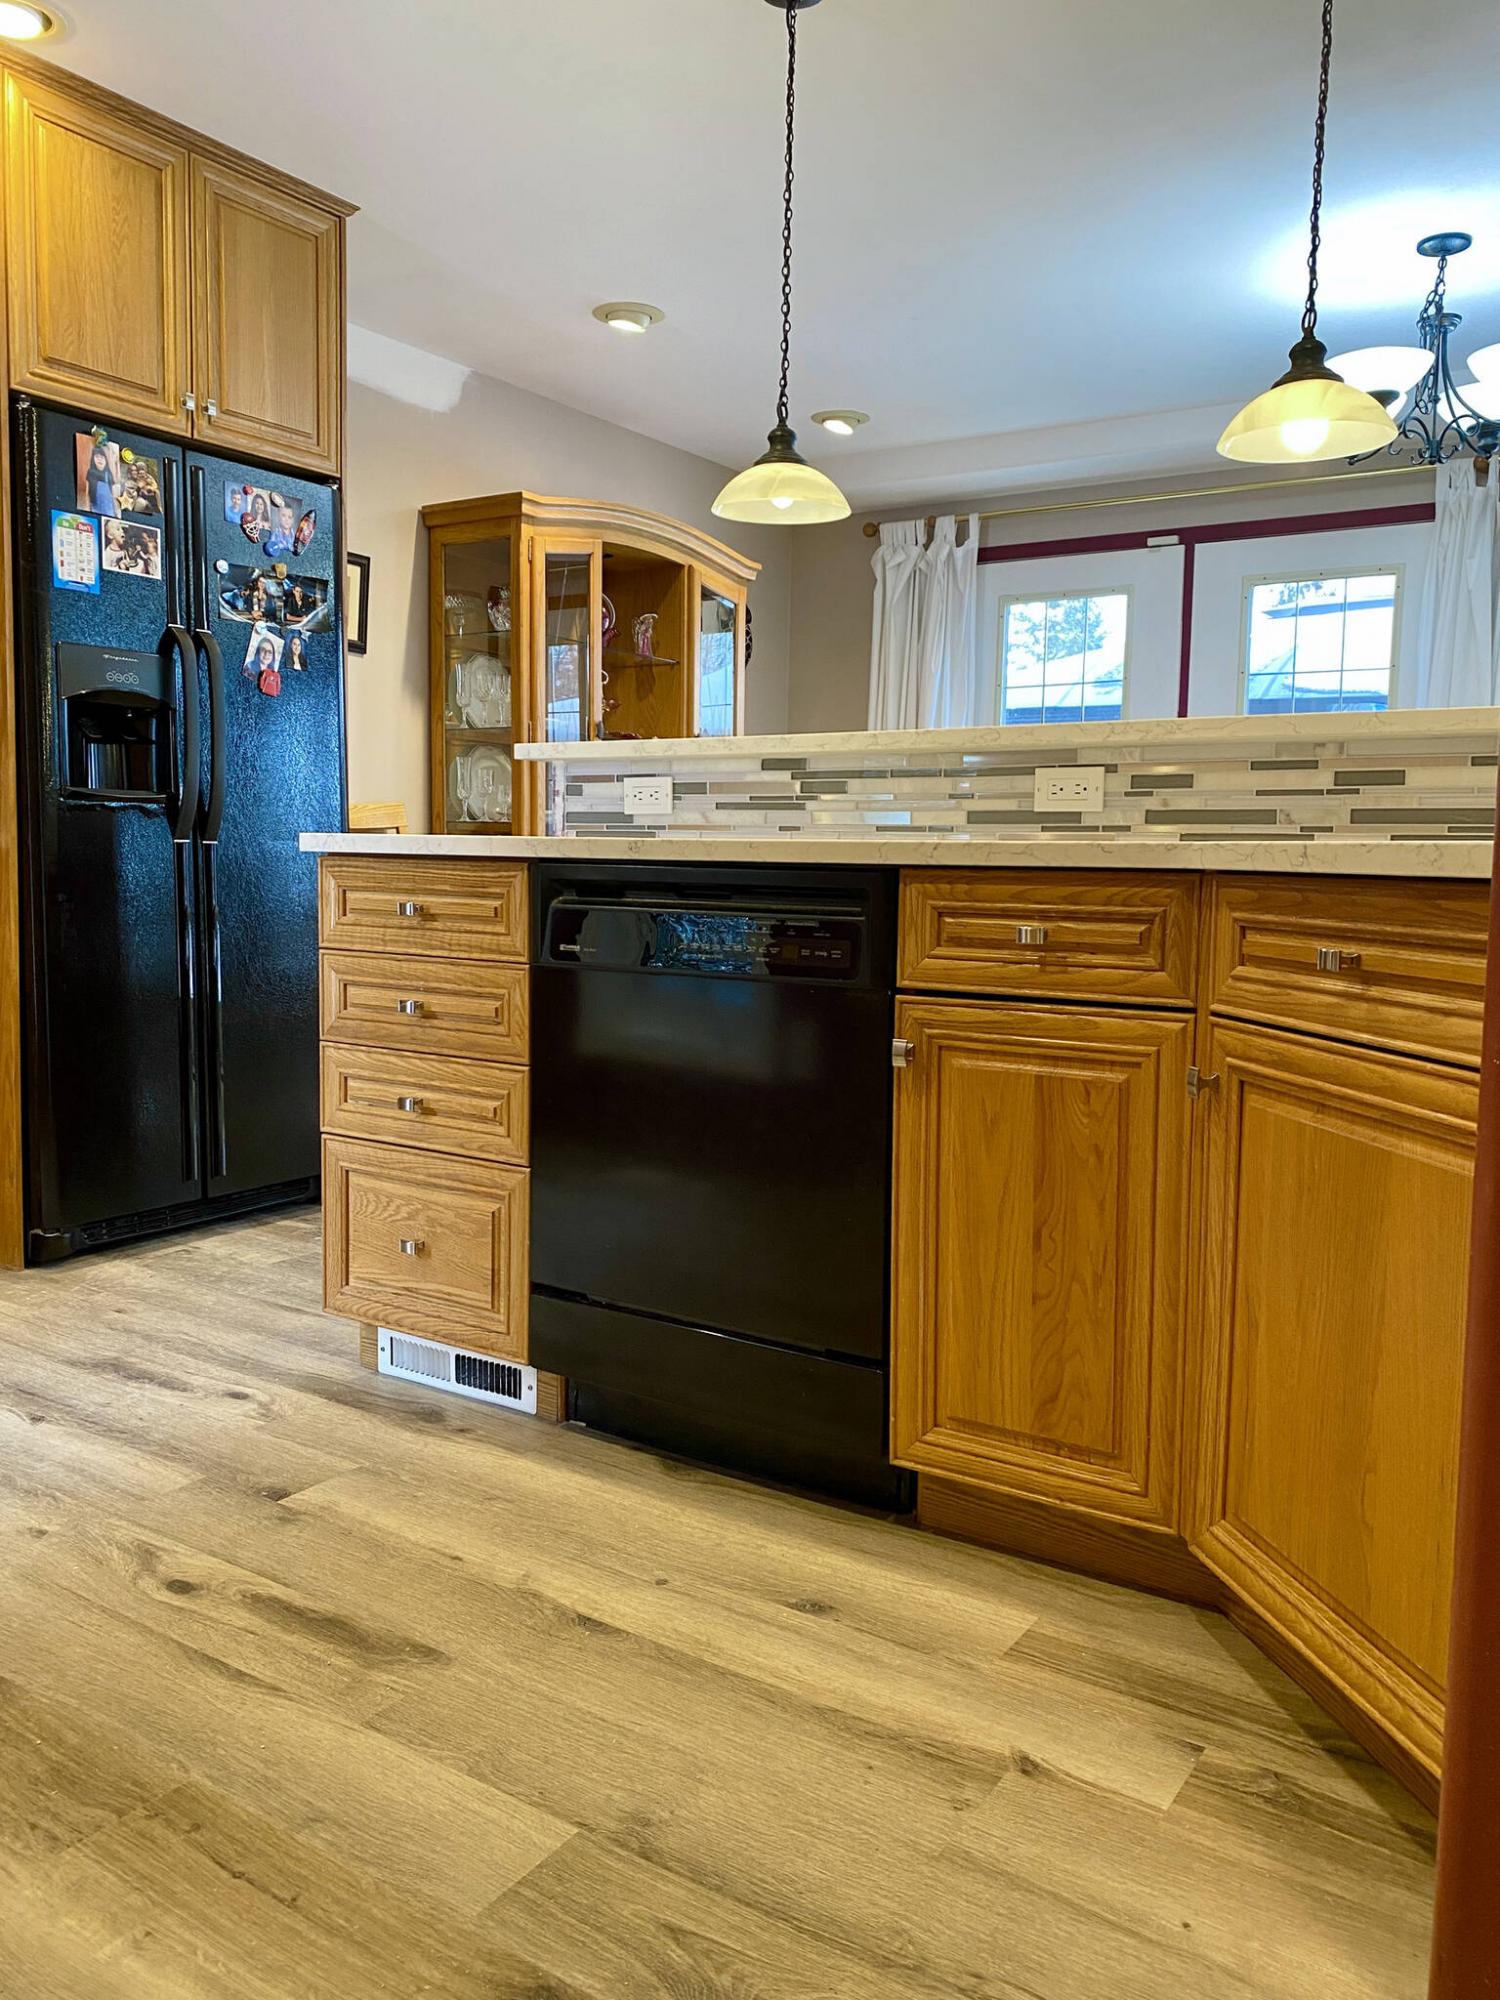 <p>Photos by Marc LaBossiere / Winnipeg Free Press</p><p>The existing cabinets take on a whole new look with new vinyl plank flooring below, and quartz countertops with mosaic backsplash above.</p>